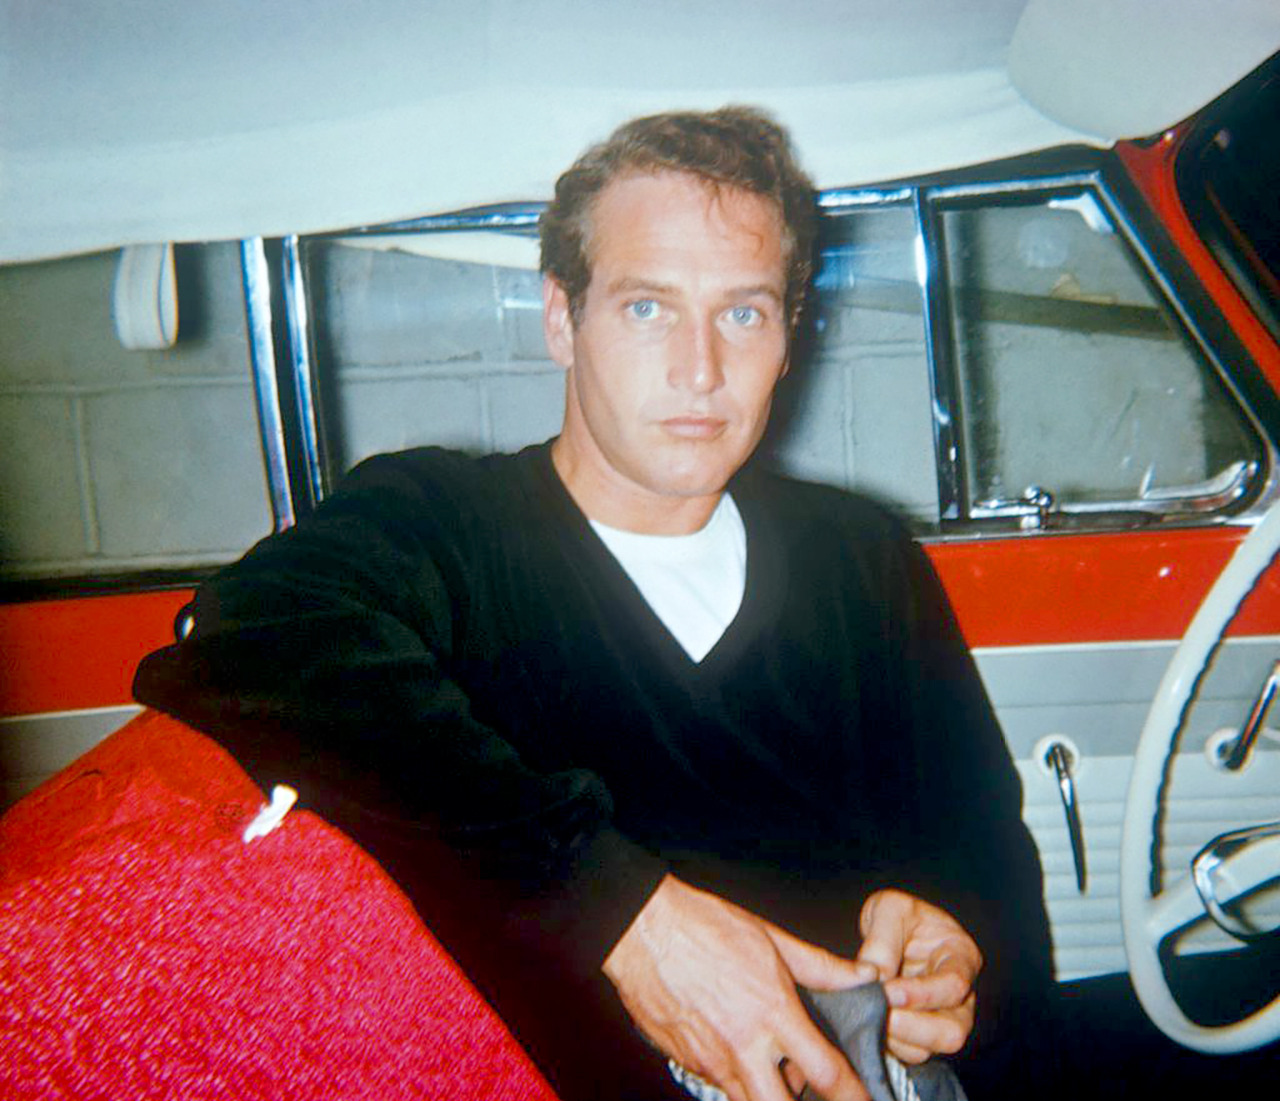 Knits For The Chill 256.
Paul Newman, 1955.